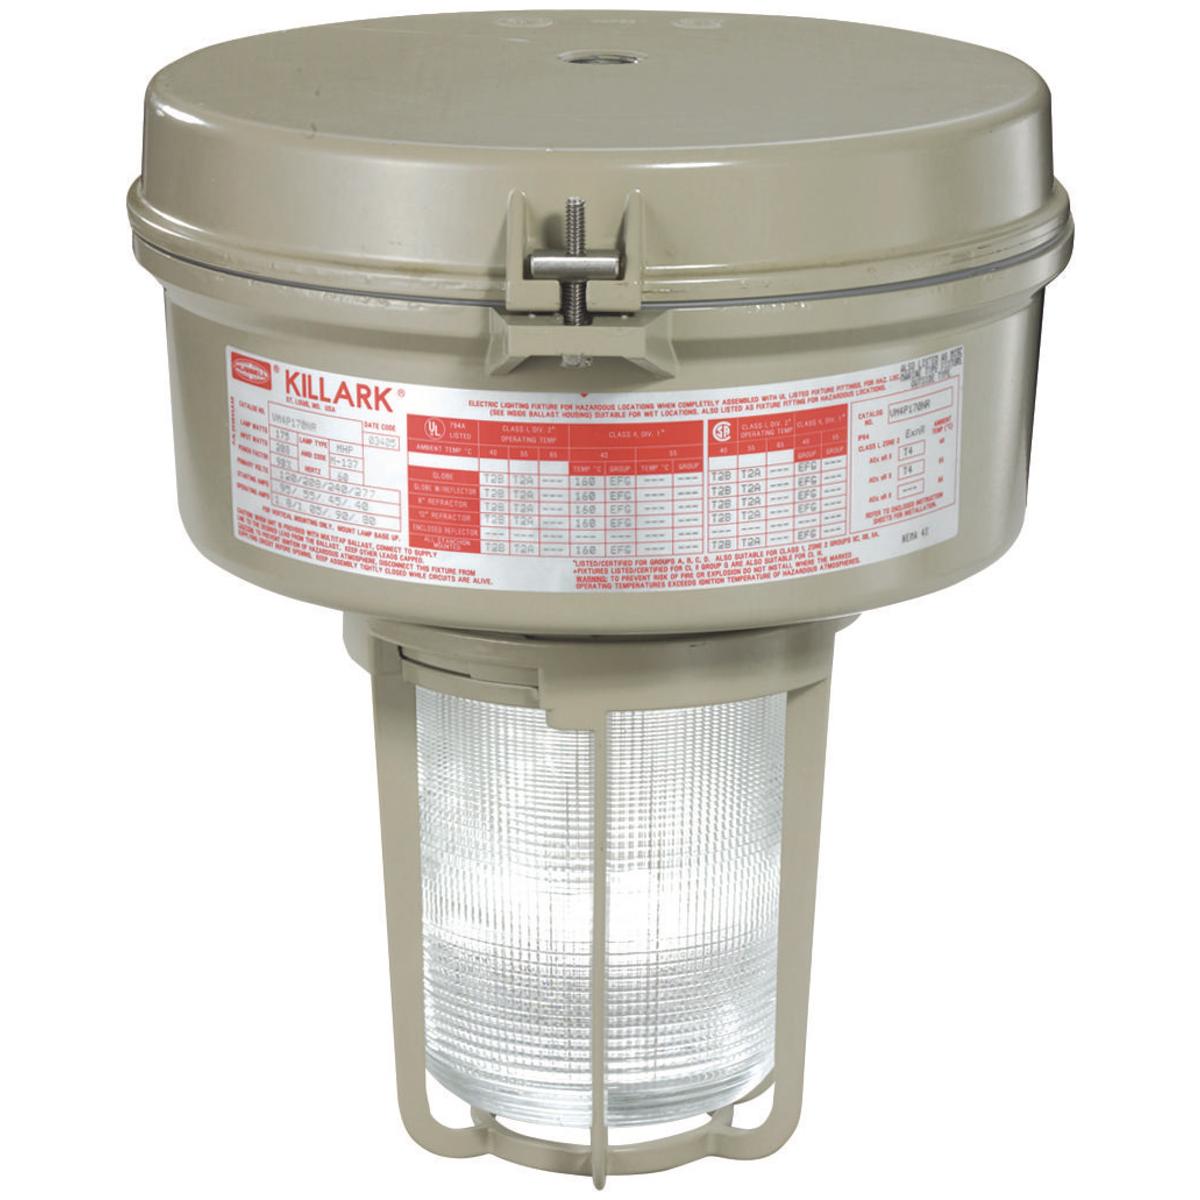 Hubbell VM3P150F2GLG VM3 Series - 150W Metal Halide Quadri-Volt - 3/4" Flexible Pendant - Globe and Guard  ; Ballast tank and splice box – corrosion resistant copper-free aluminum alloy with baked powder epoxy/polyester finish, electrostatically applied for complete, uniform 